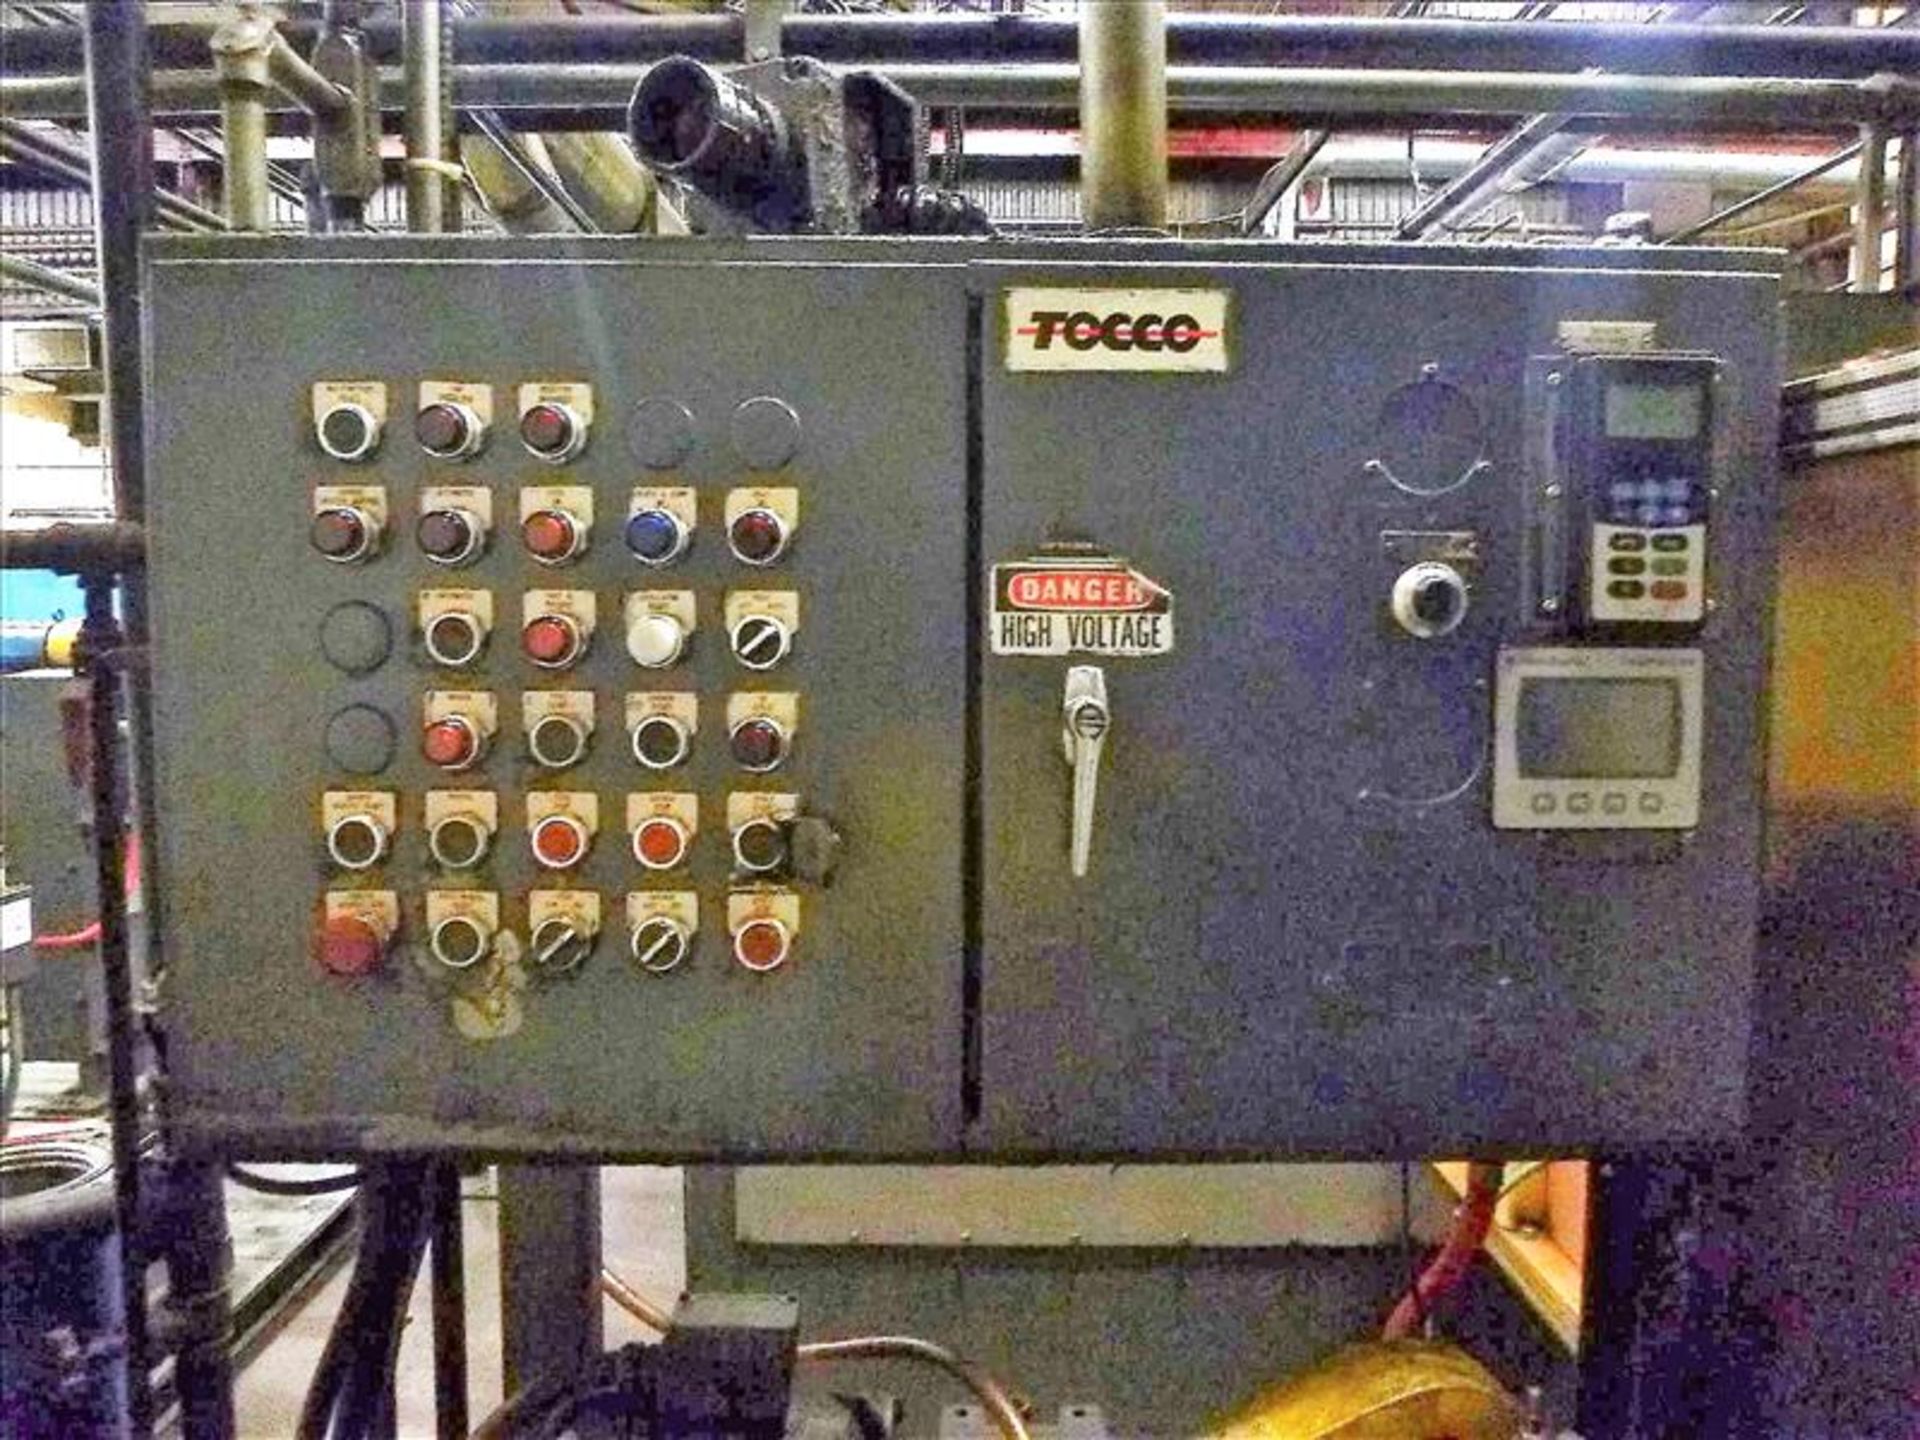 TOCCO Hardener Unit w/ TOCCOTRON 5EA 150 kw RF Generator, s/n 12-8313-16 c/w Distilled Water, - Image 3 of 23